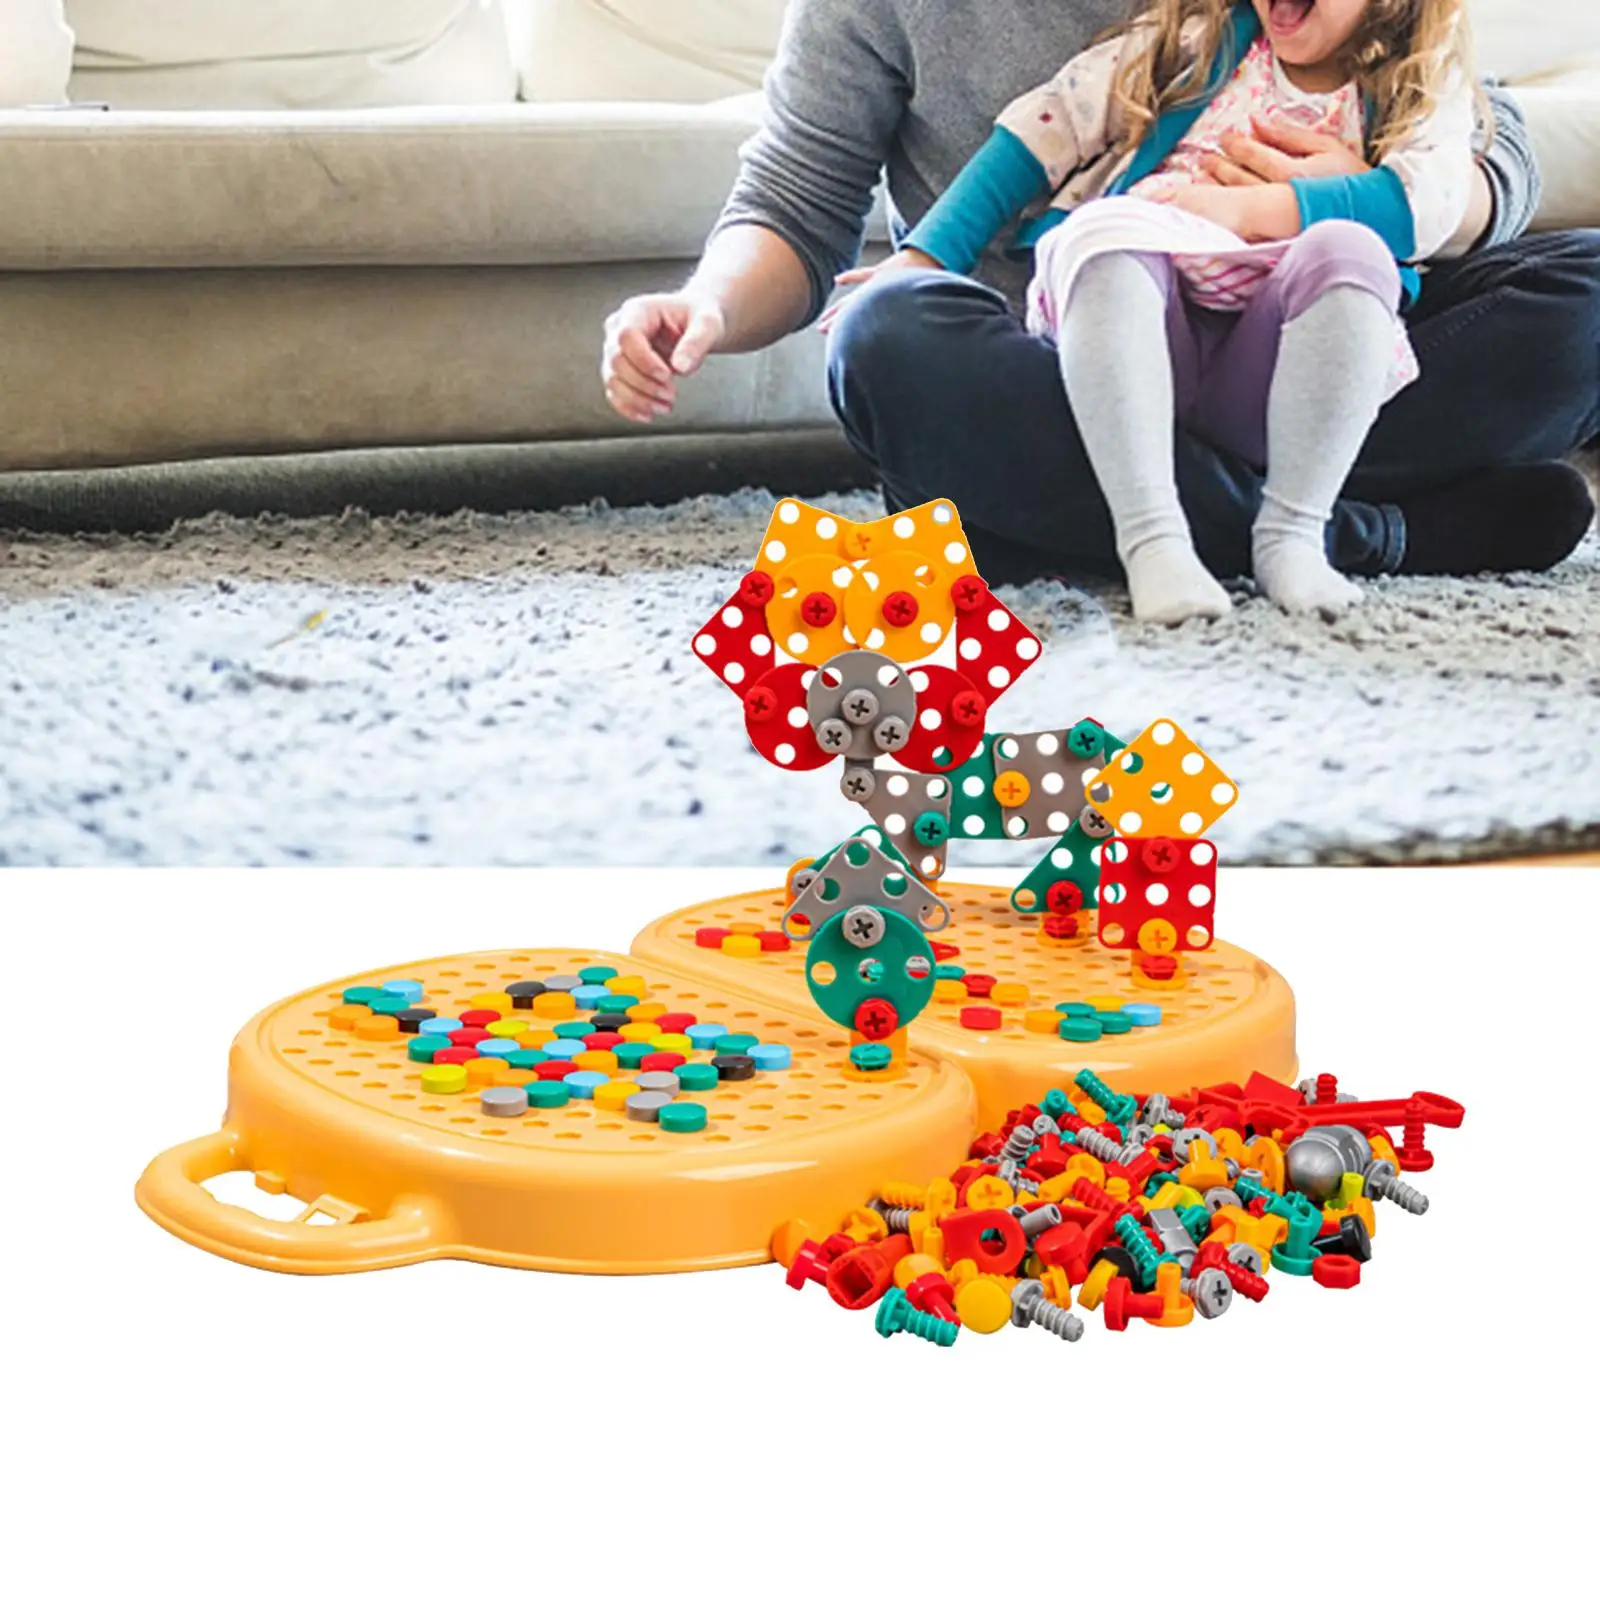 Building Toys Puzzle Toys Building Blocks Games Set Develop Creativity Construction Engineering Learning Toys for Toddler